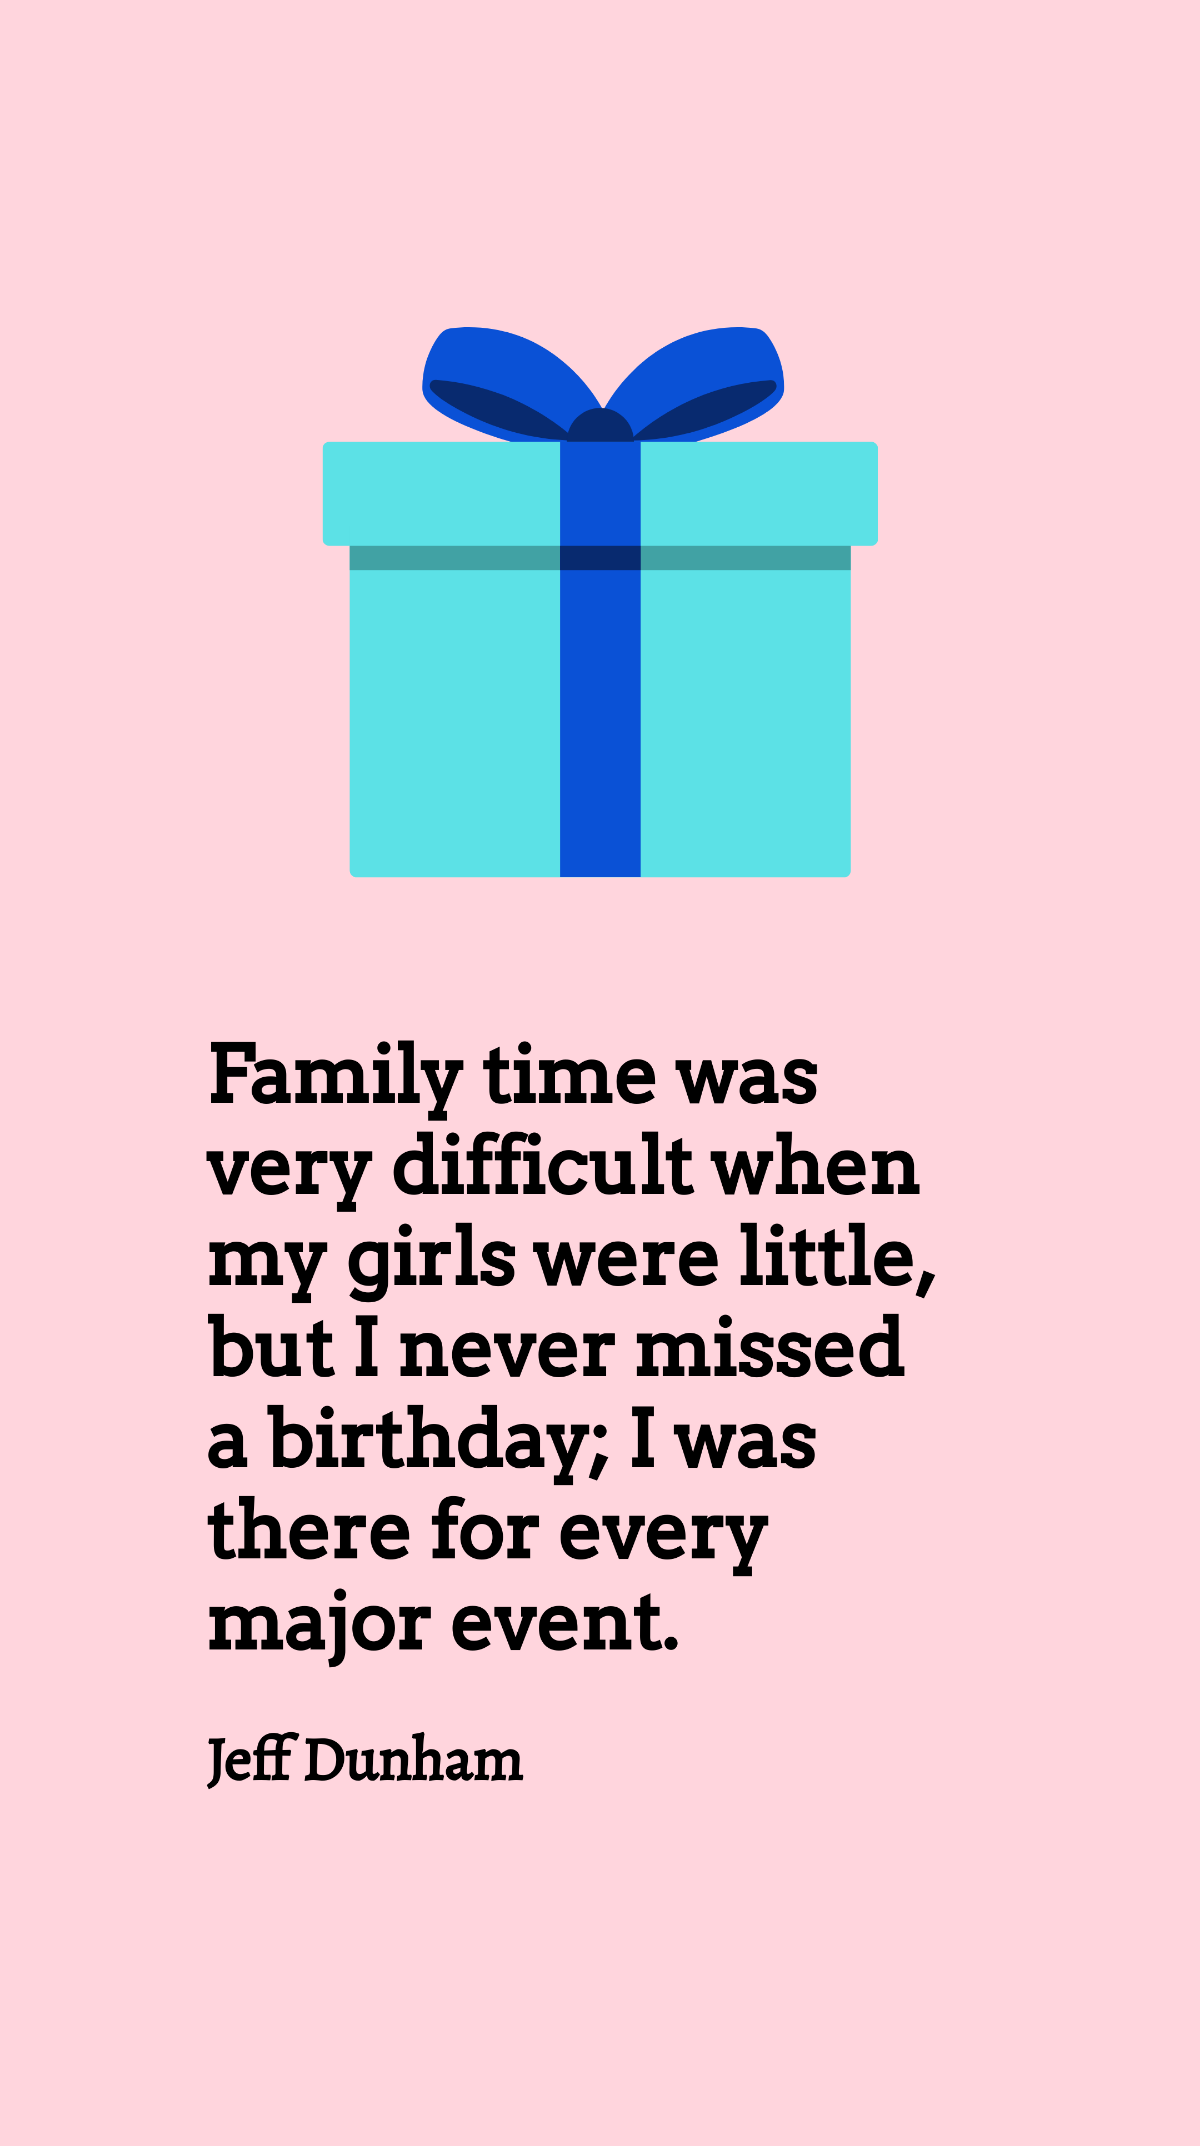 Jeff Dunham - Family time was very difficult when my girls were little, but I never missed a birthday; I was there for every major event.